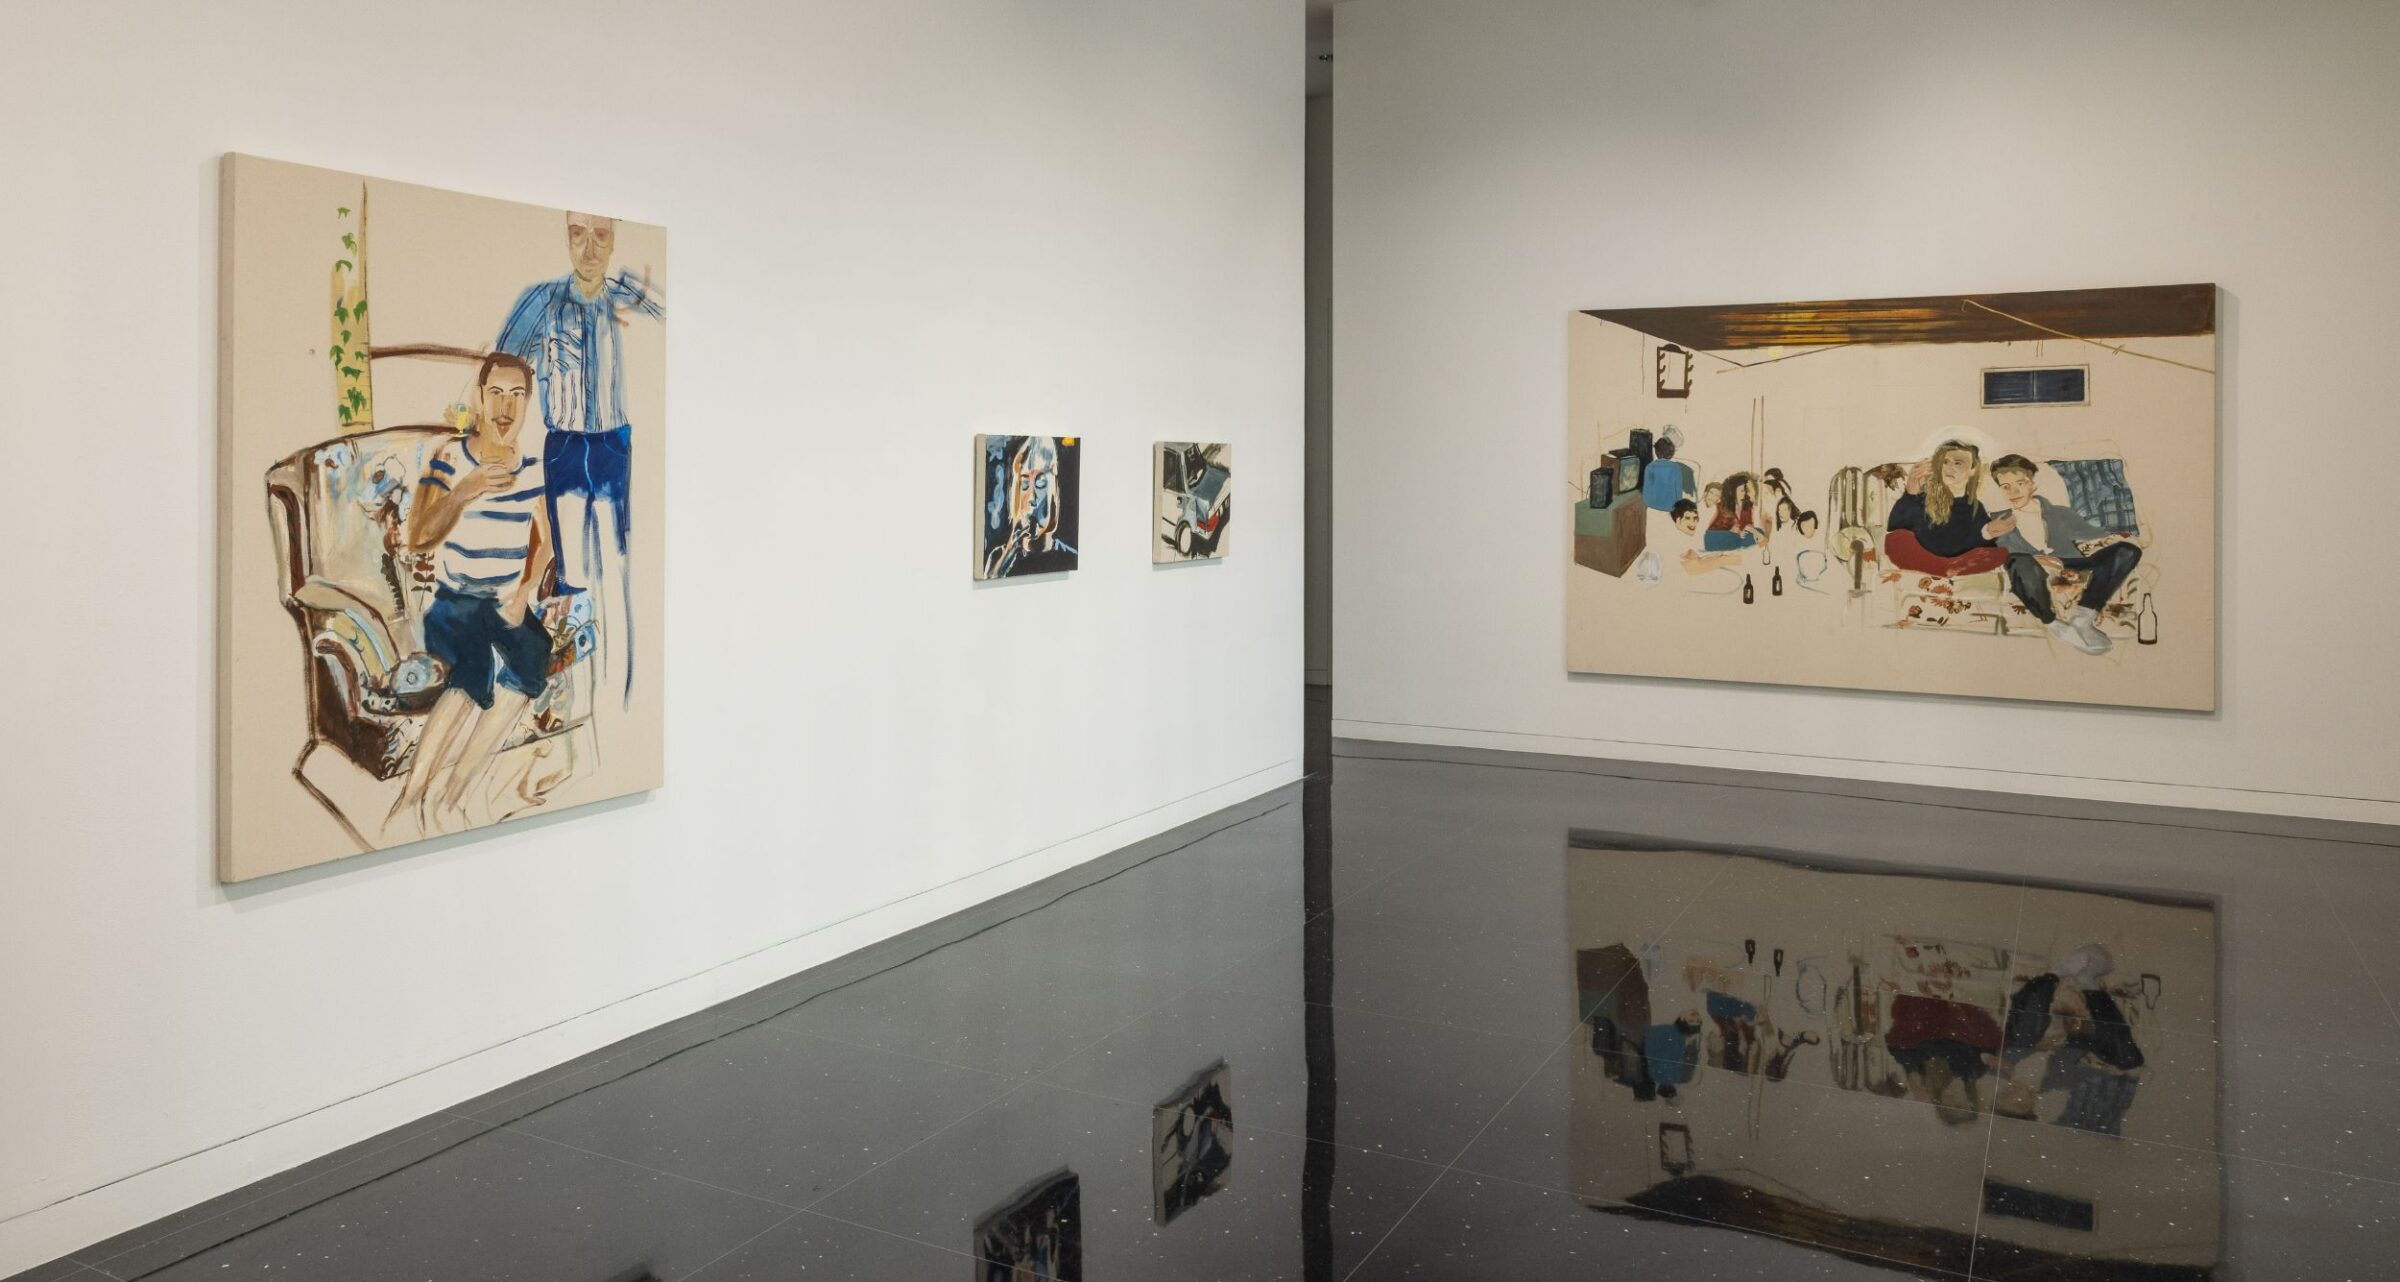 A white-walled gallery corner. On the left wall hang three paintings of varying size. On the right wall hands one large painting of two adults undressed in a bed witnessed by a small girl in a blue nightgown.